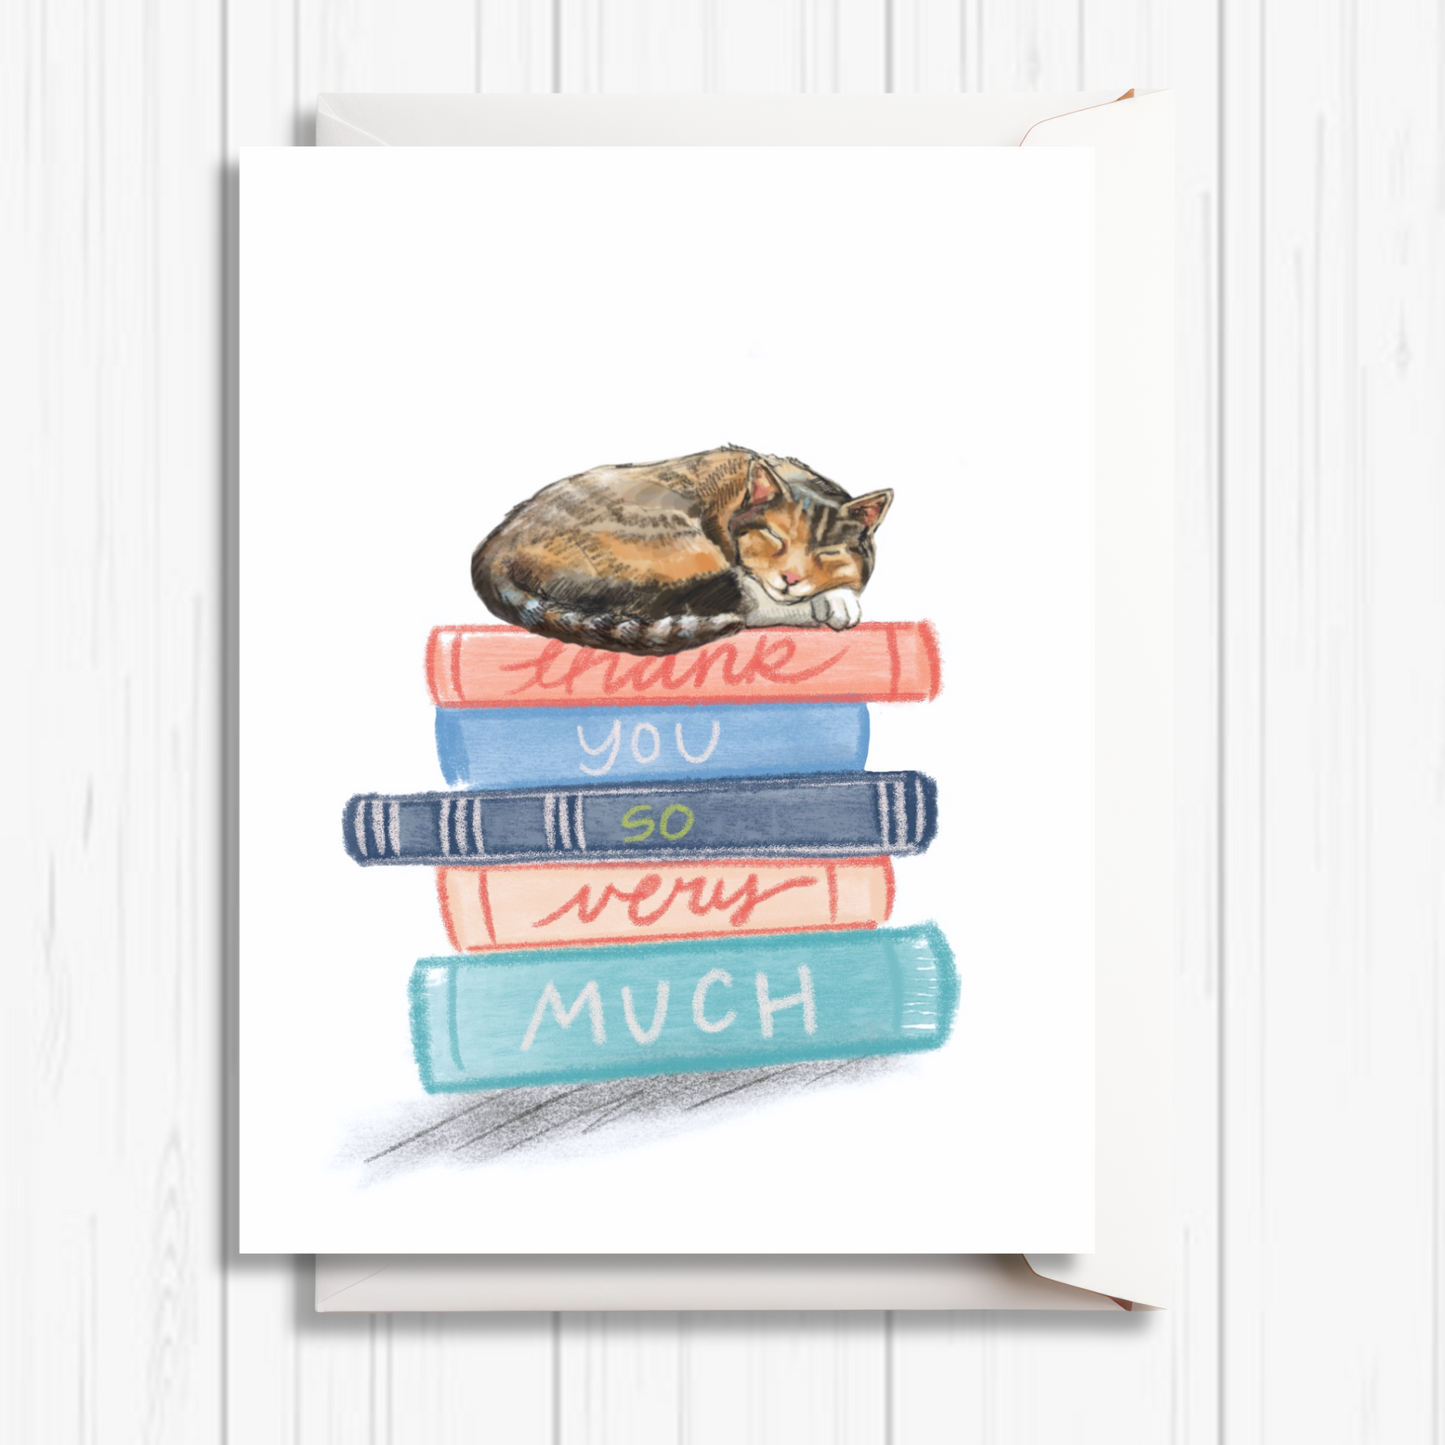 Cat Thank You Cards | Set of 6 Cat Thank You Cards | Blank Cat Cards